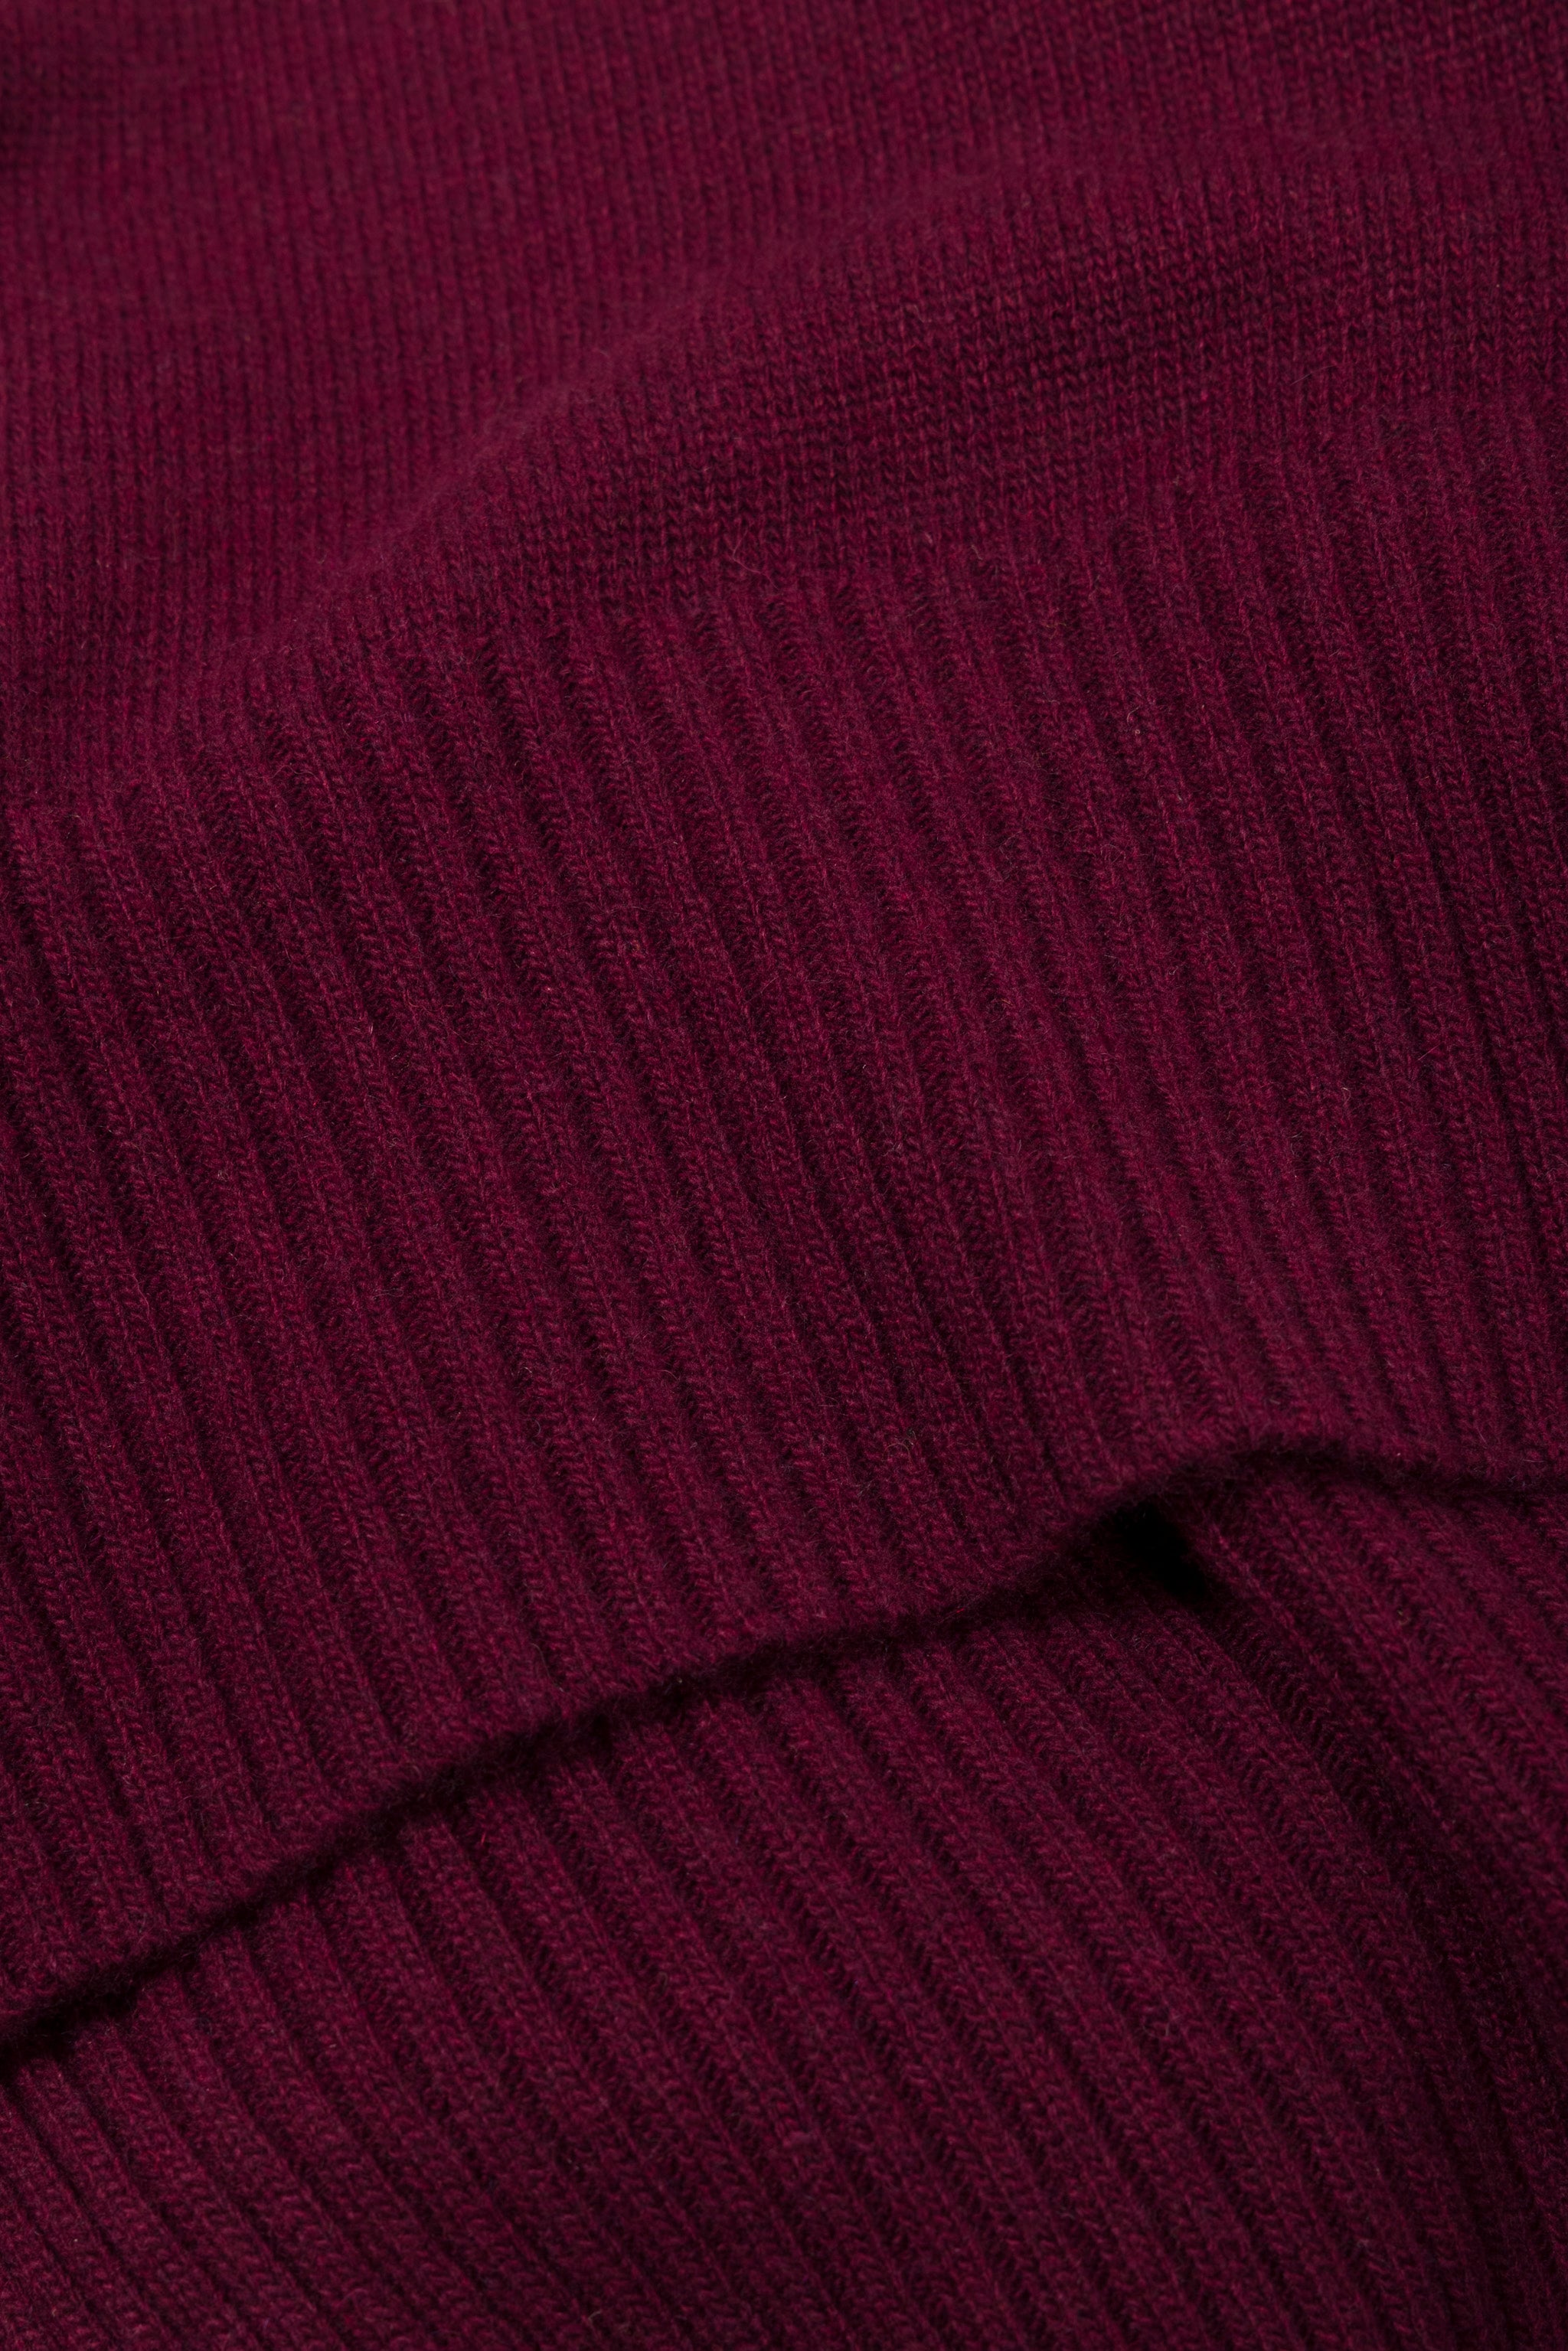 Oversized Cashmere Blend Roll Neck (Mulberry)